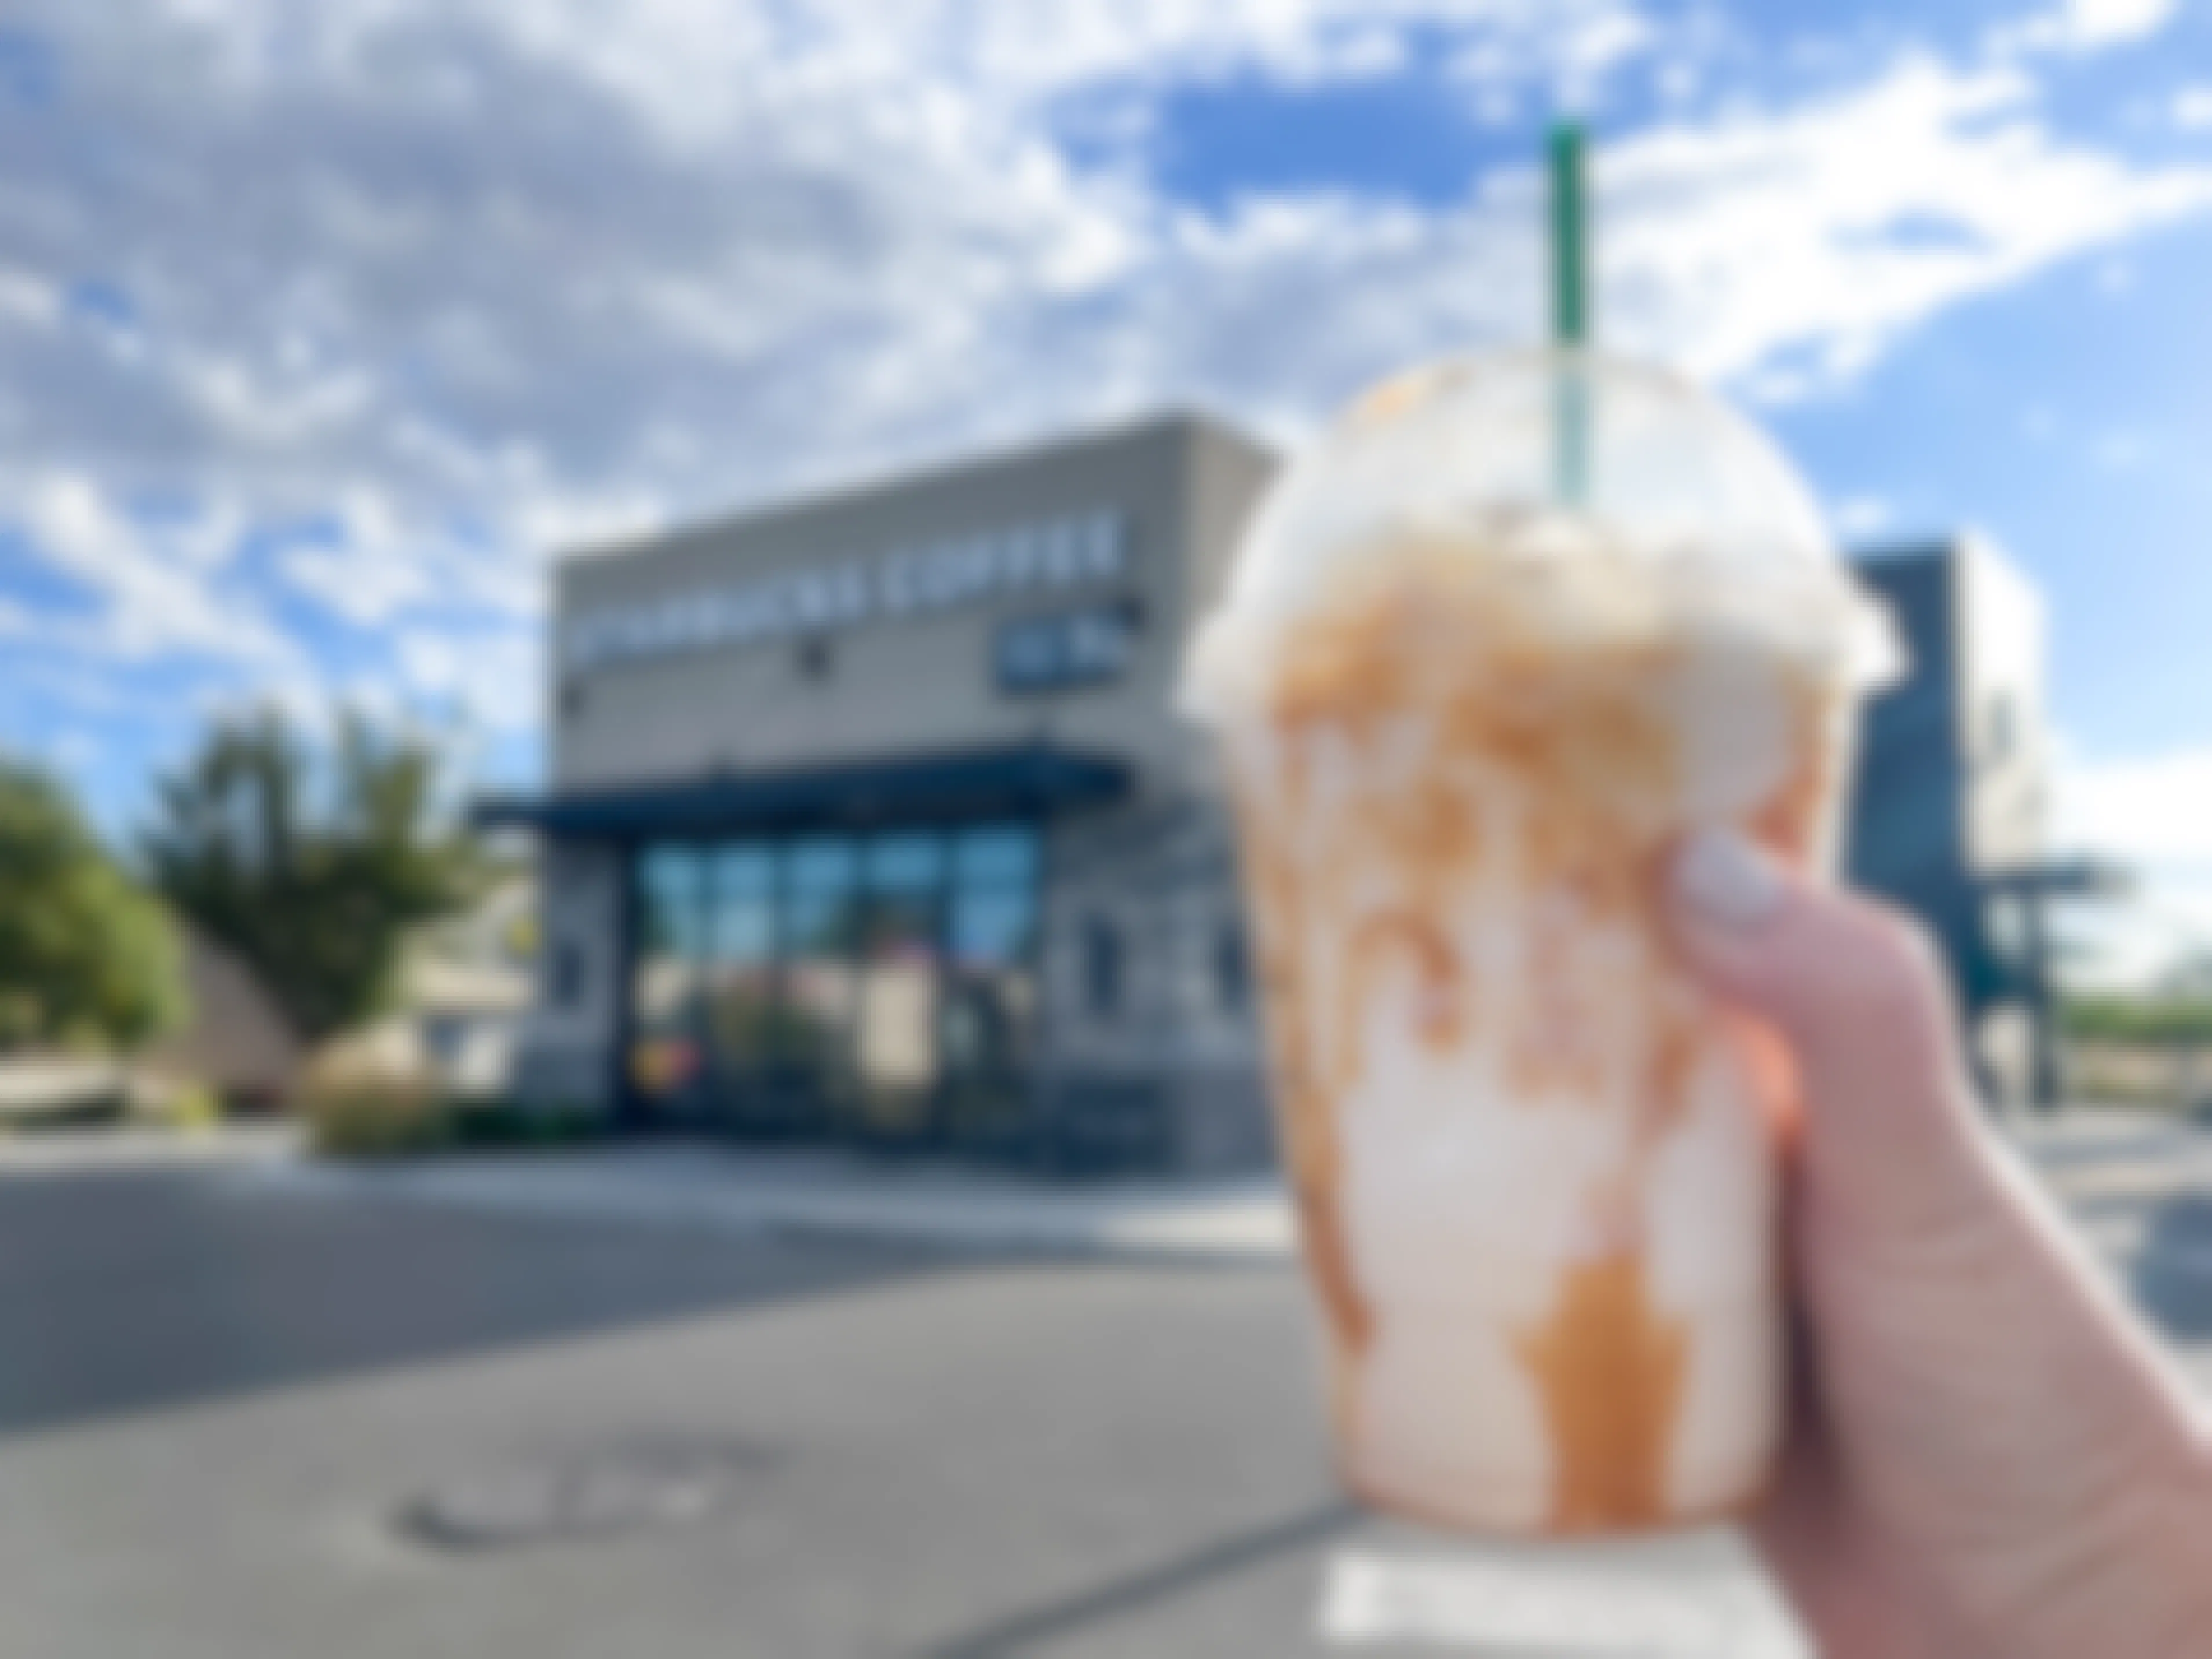 a starbucks frappuccino being held outside starbucks